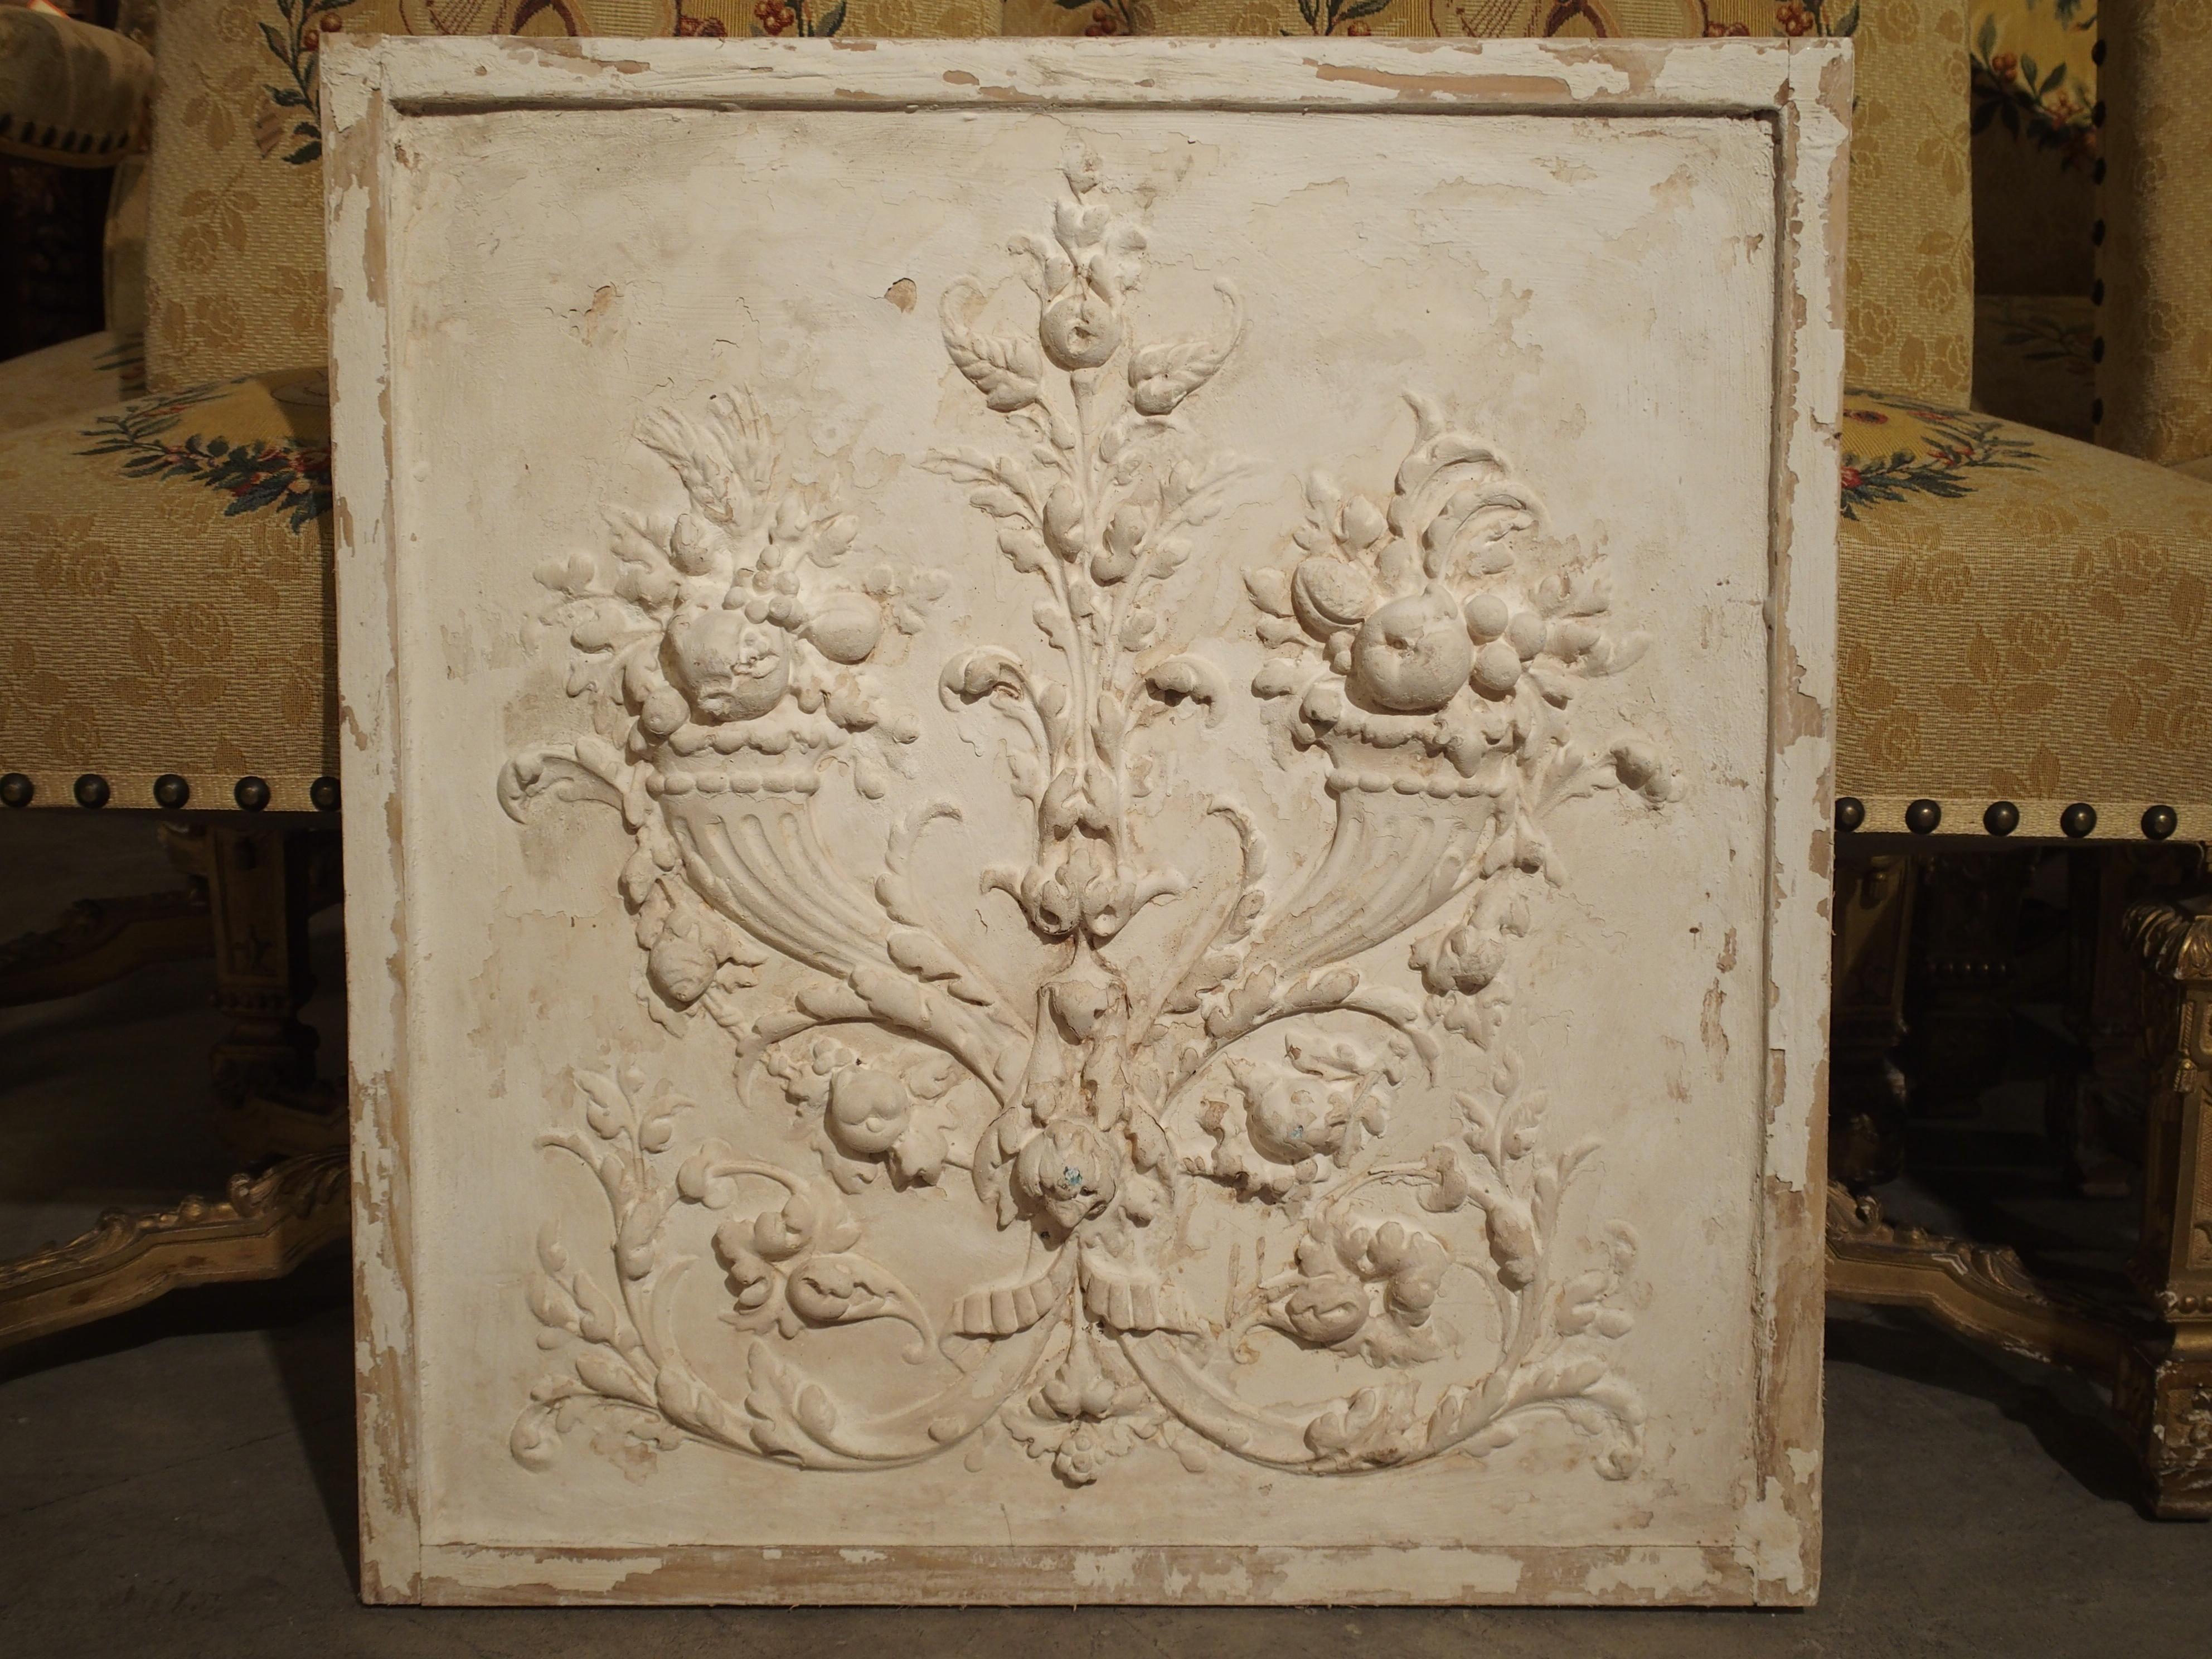 From France, this framed plaster bas relief panel depicts two cornucopias with scrolling rinceau at the center and sides. The cornucopias are filled with fruit, flowers and foliation. This wonderful panel was made with old wood elements and